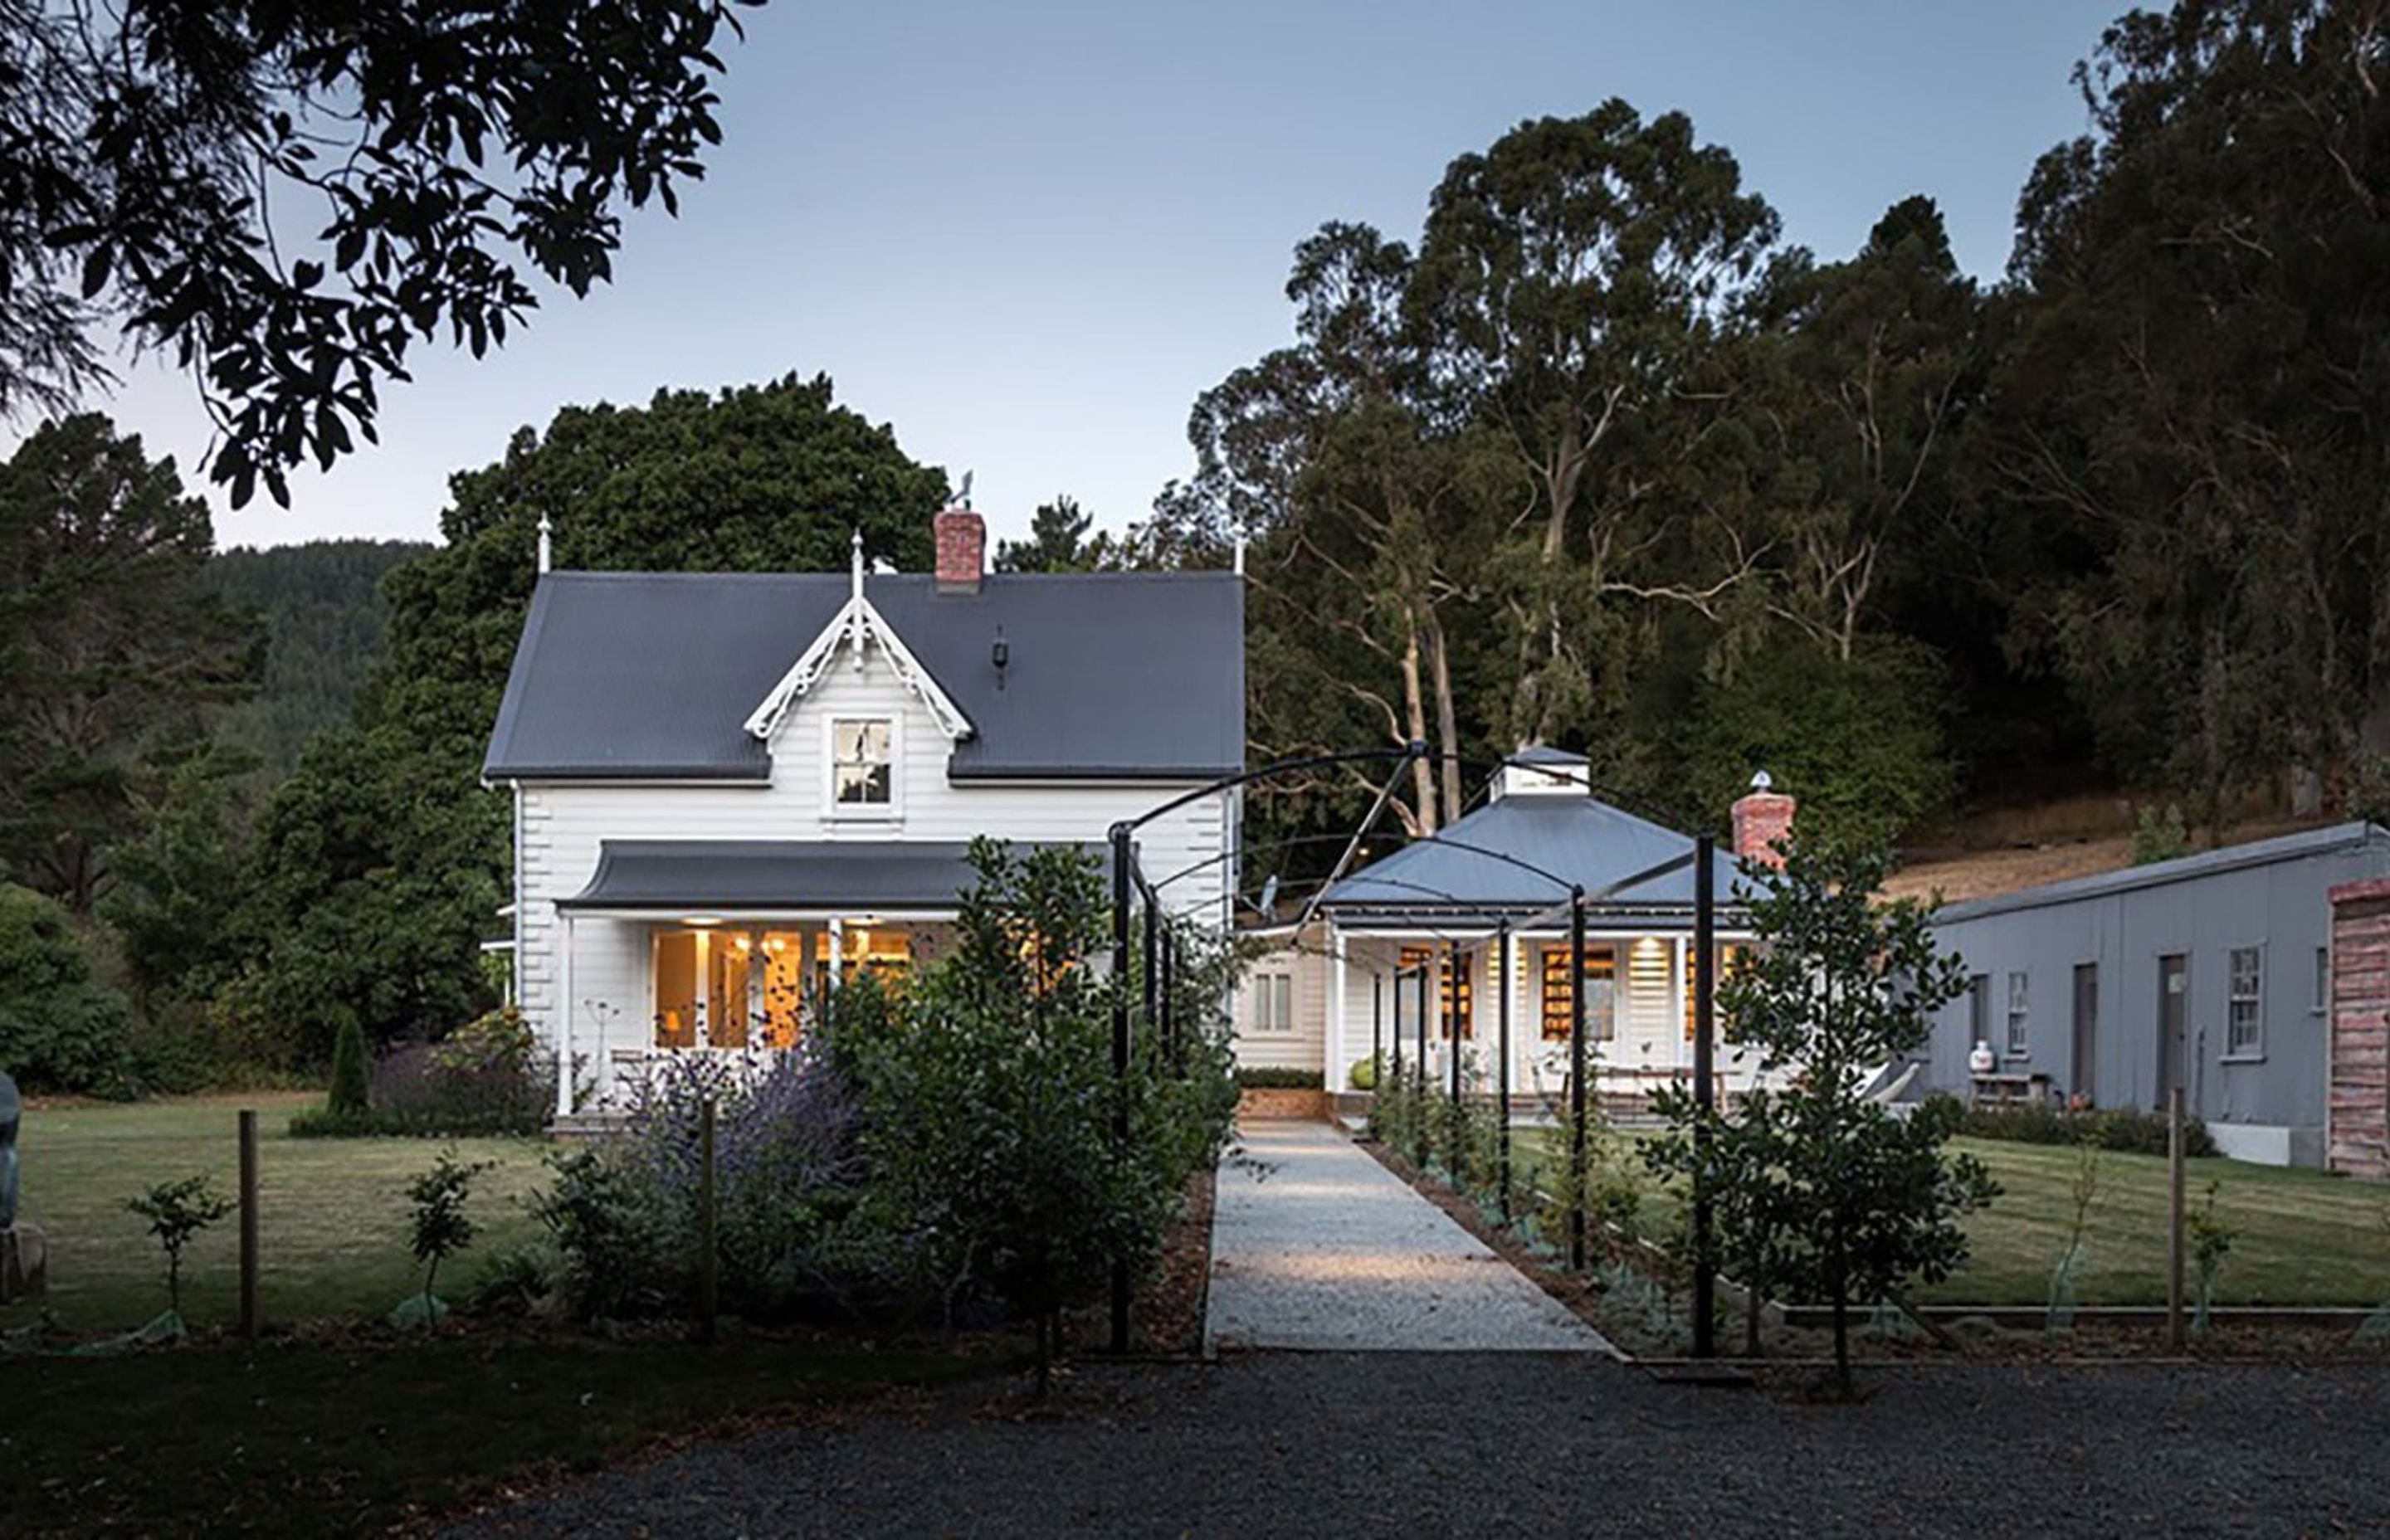 Built in the 1860s, Louden Homestead has been lovingly restored with the former staff quarters on the right turned into a library.